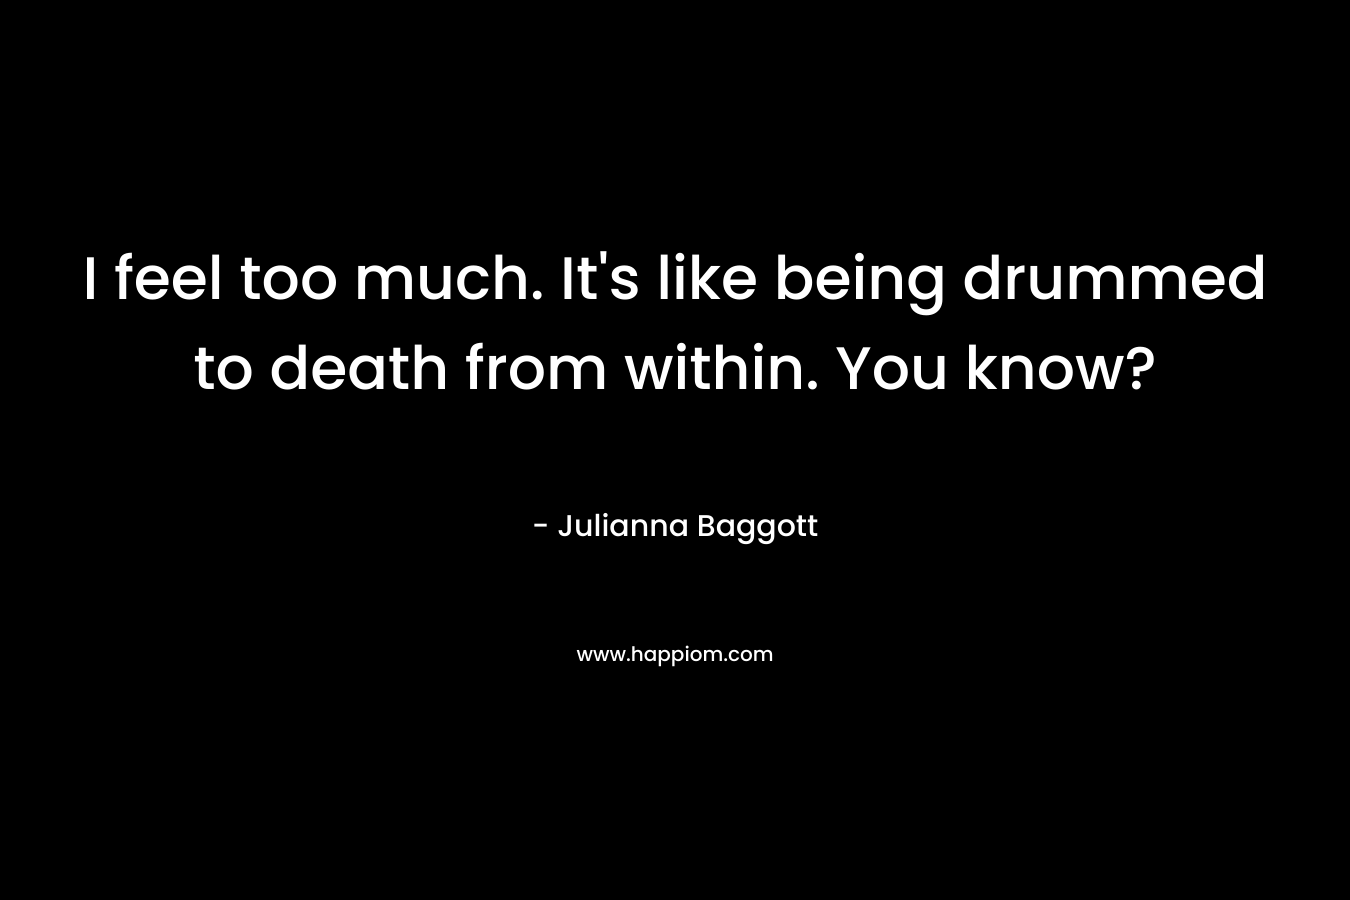 I feel too much. It’s like being drummed to death from within. You know? – Julianna Baggott